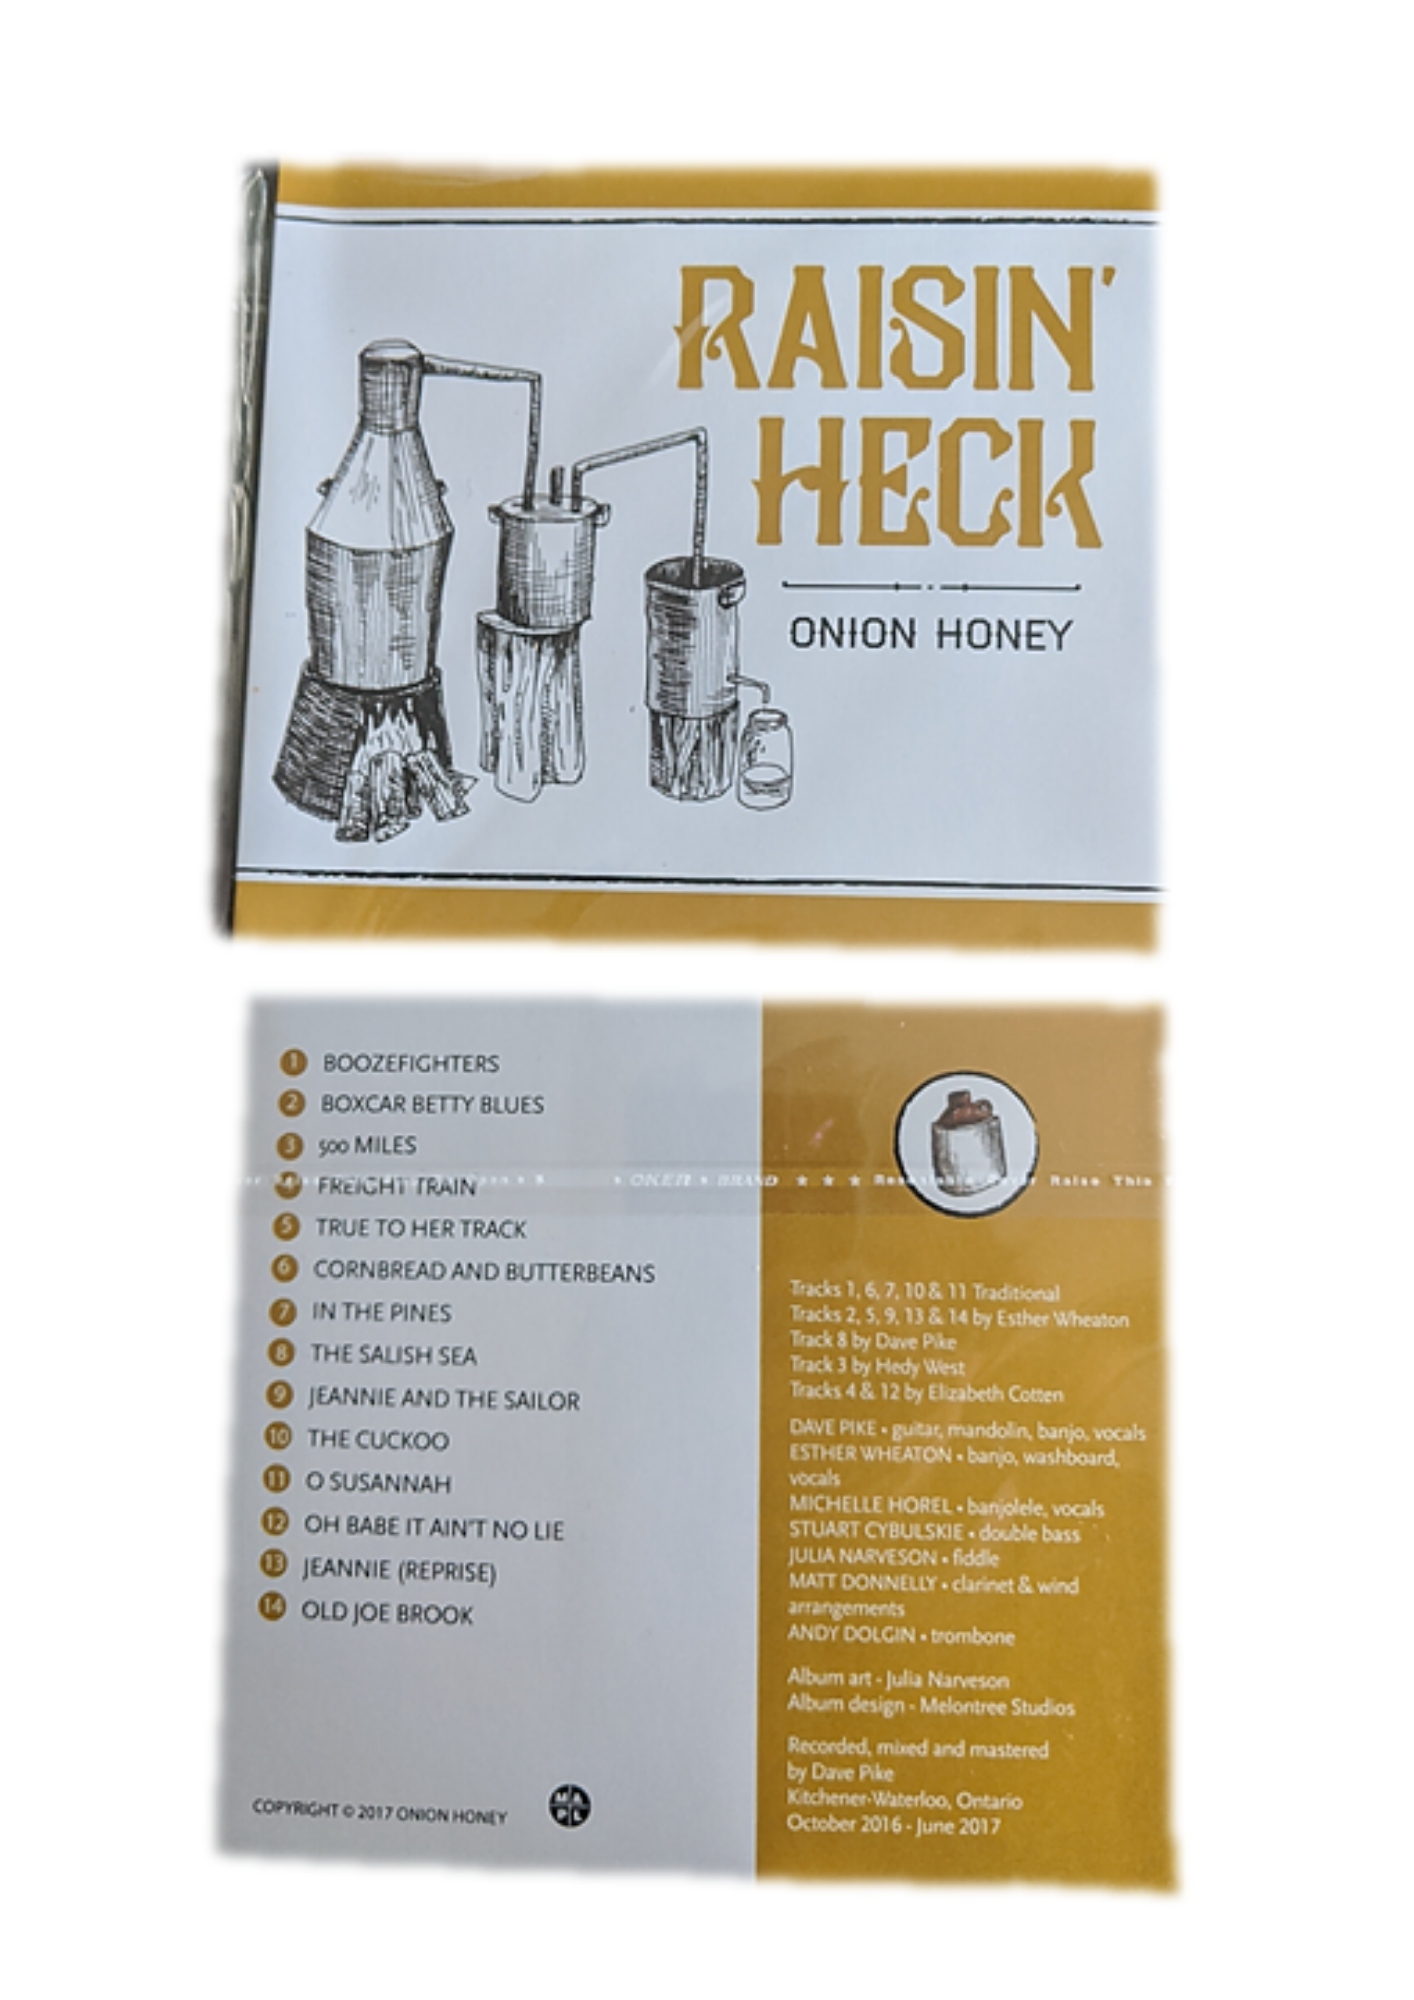 Raisin' Heck Onion Honey CD , front and back shown